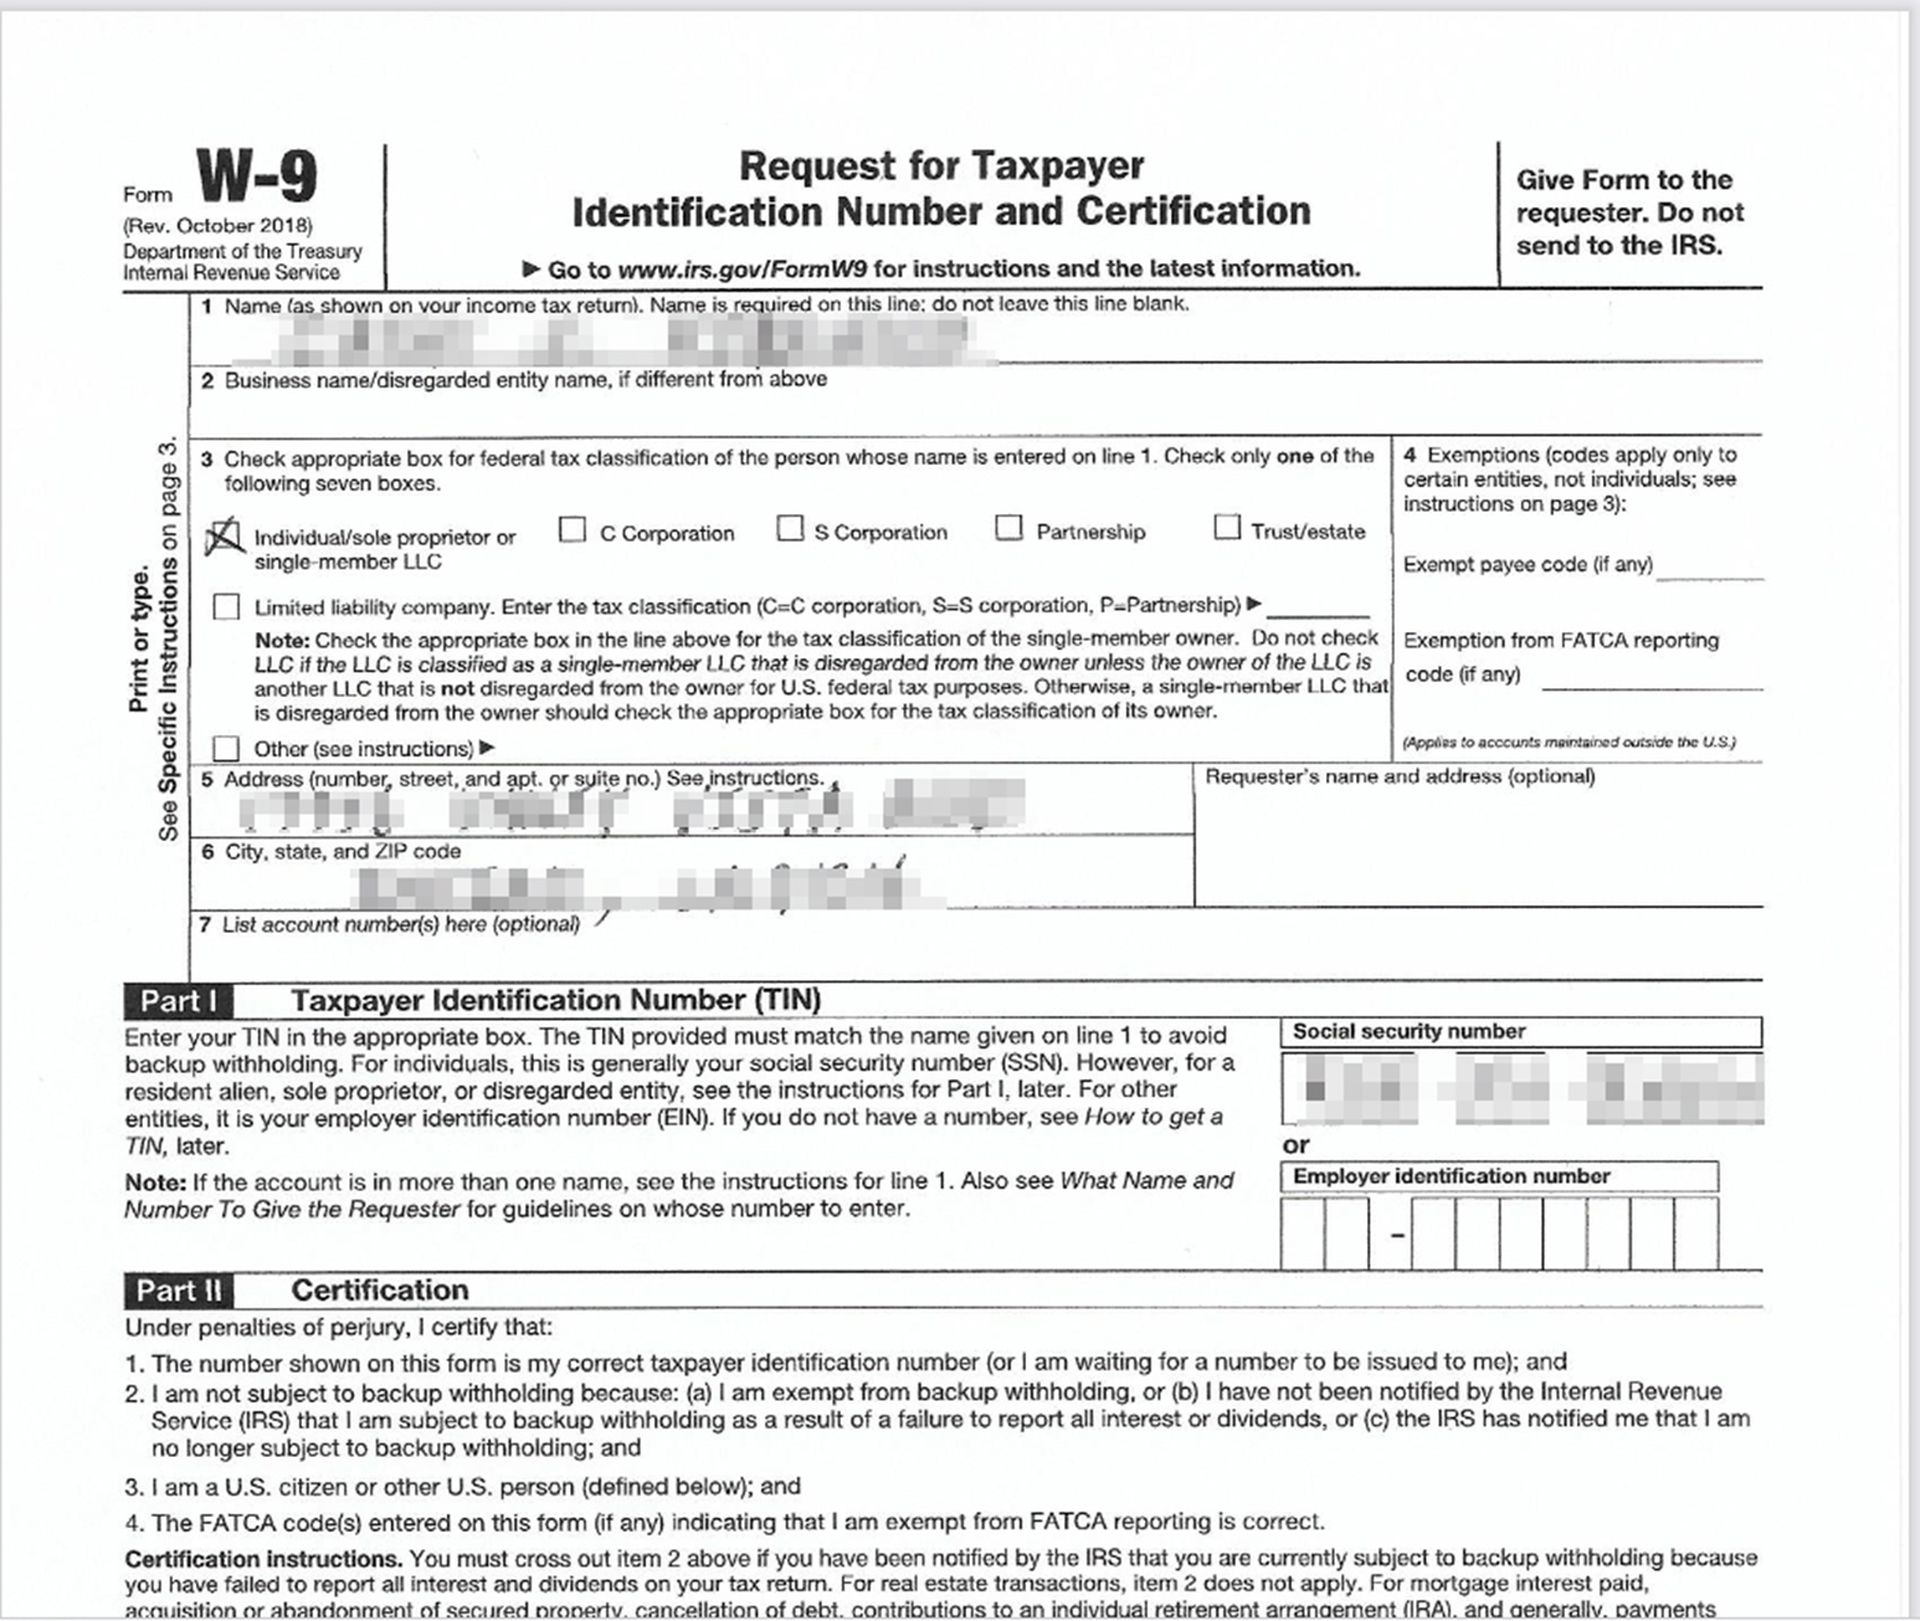 A redacted tax form that was leaked online